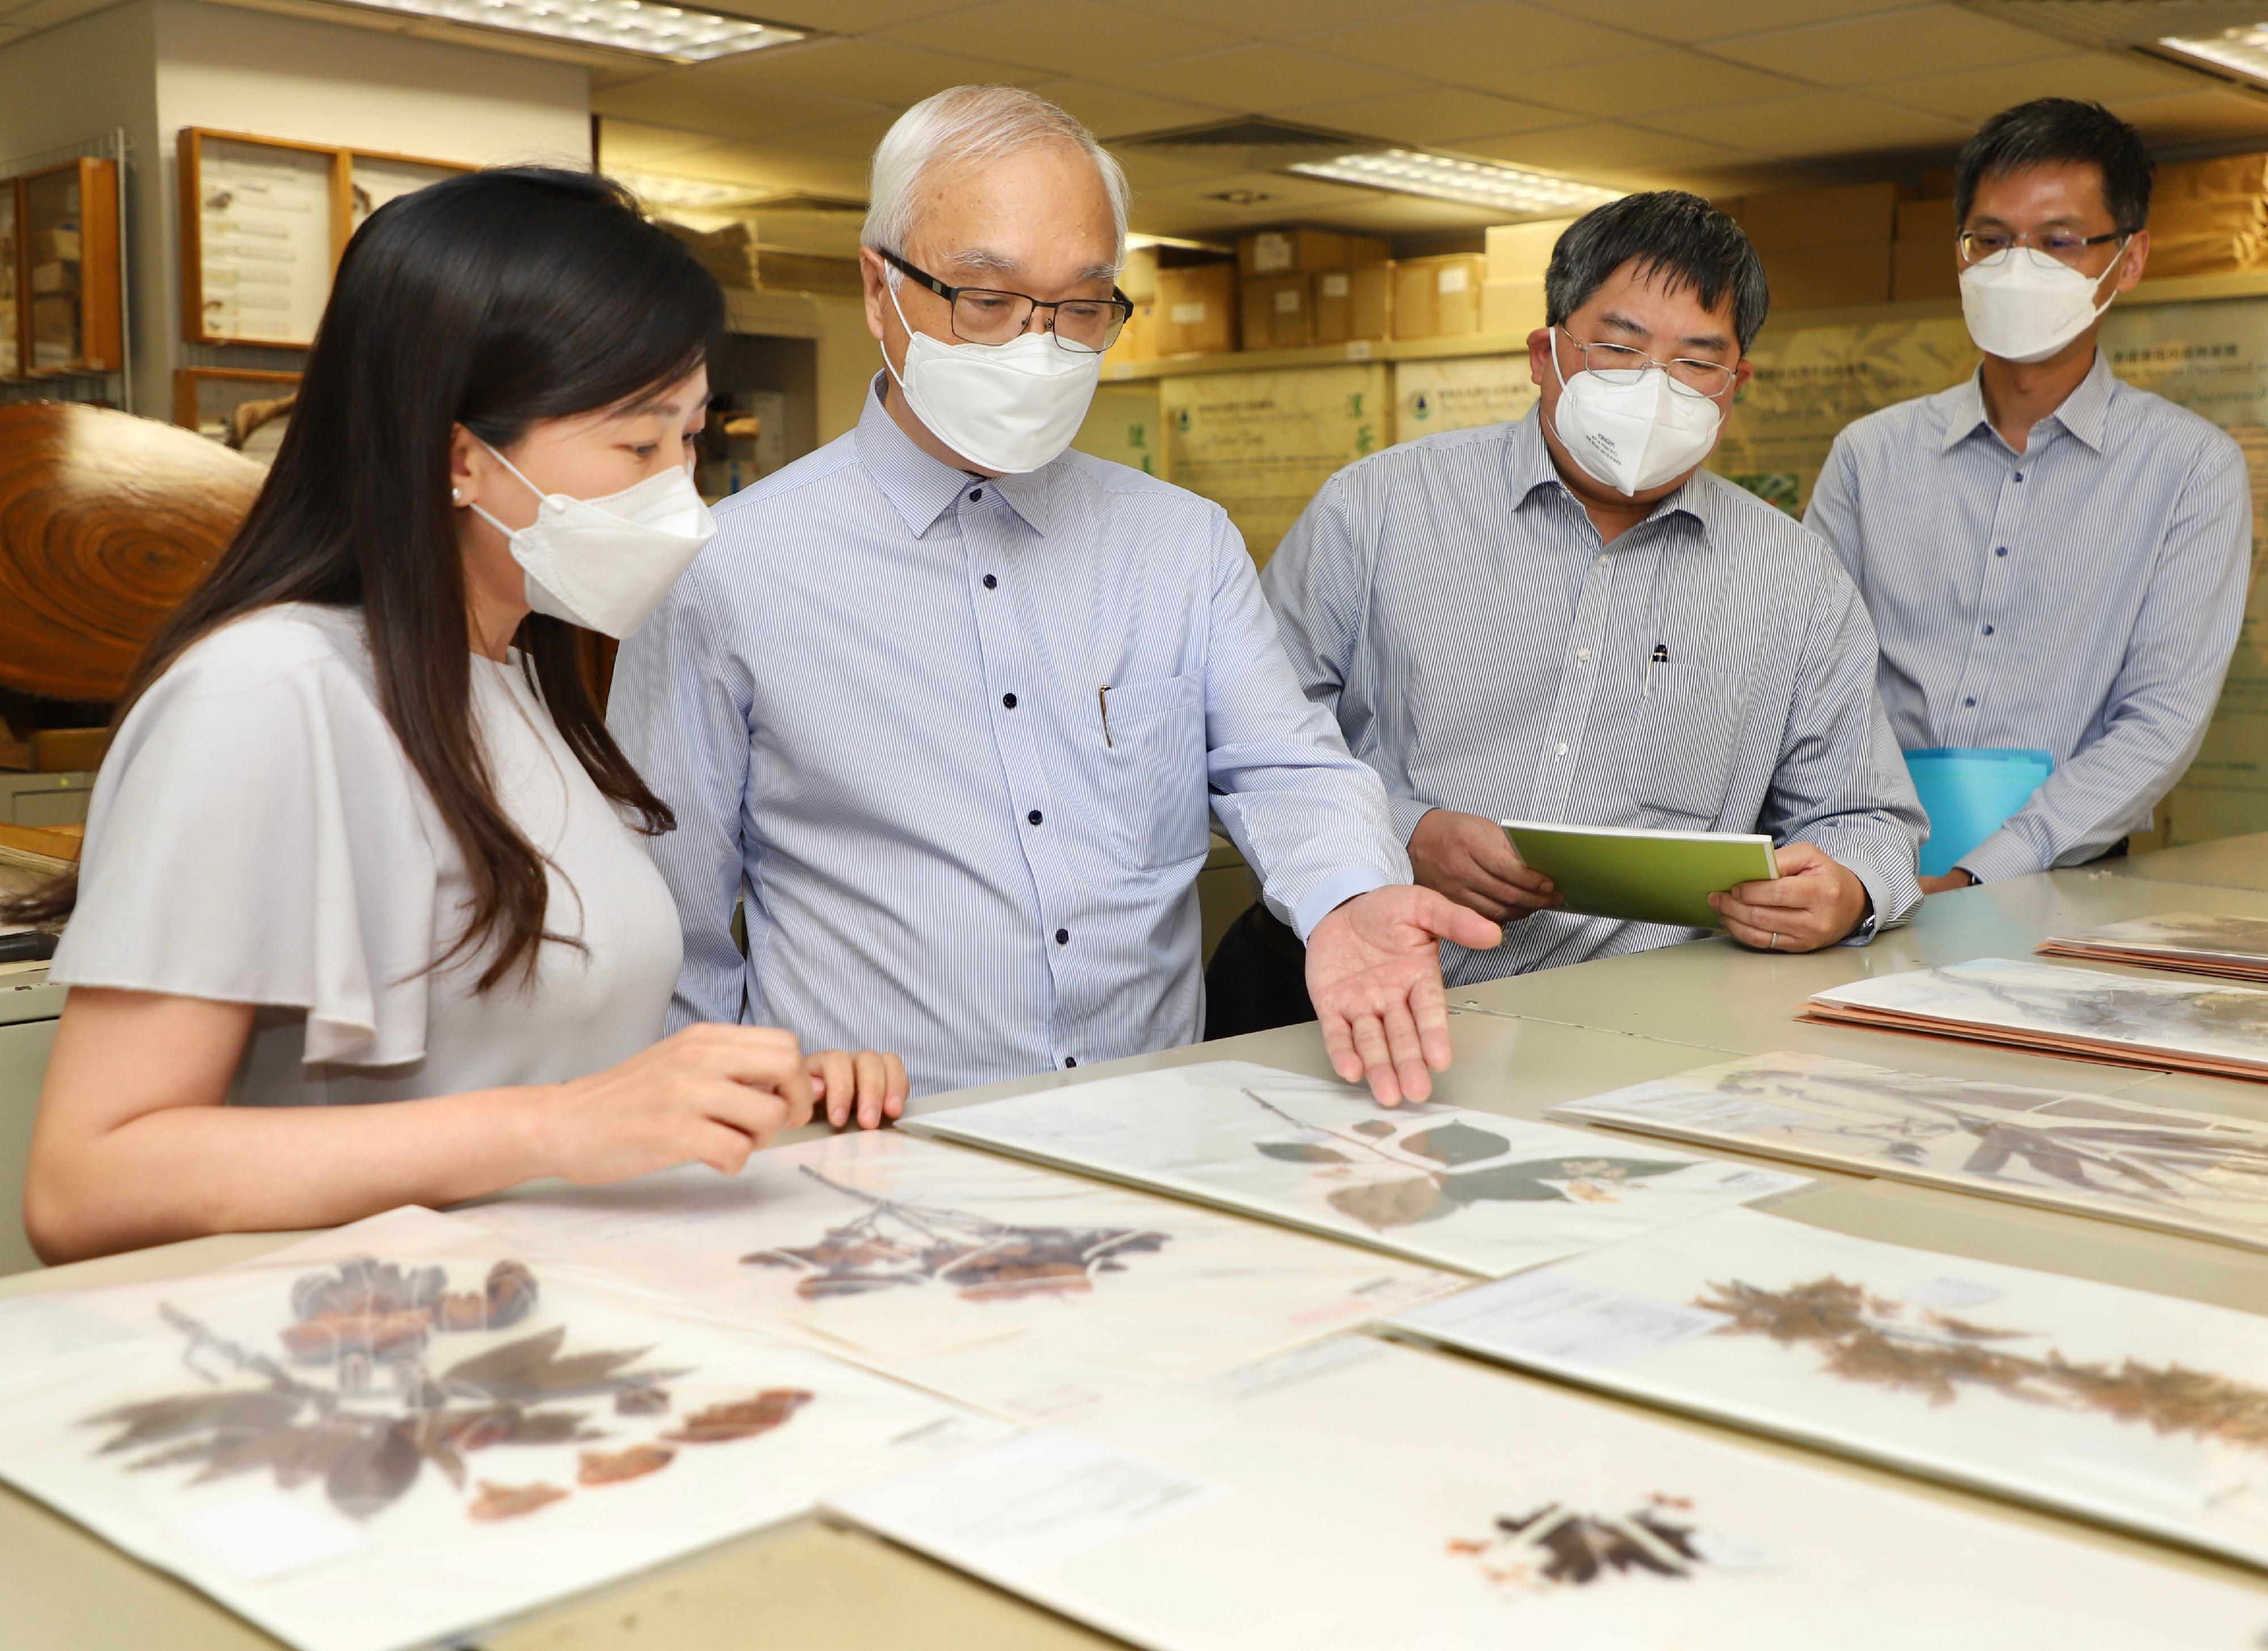 The Secretary for Environment and Ecology, Mr Tse Chin-wan (second left), accompanied by the Director of Agriculture, Fisheries and Conservation, Dr Leung Siu-fai (second right), today (July 22) visits the Hong Kong Herbarium and is briefed on the Agriculture, Fisheries and Conservation Department's work regarding the collection, identification and curation of specimens representative of Hong Kong flora.